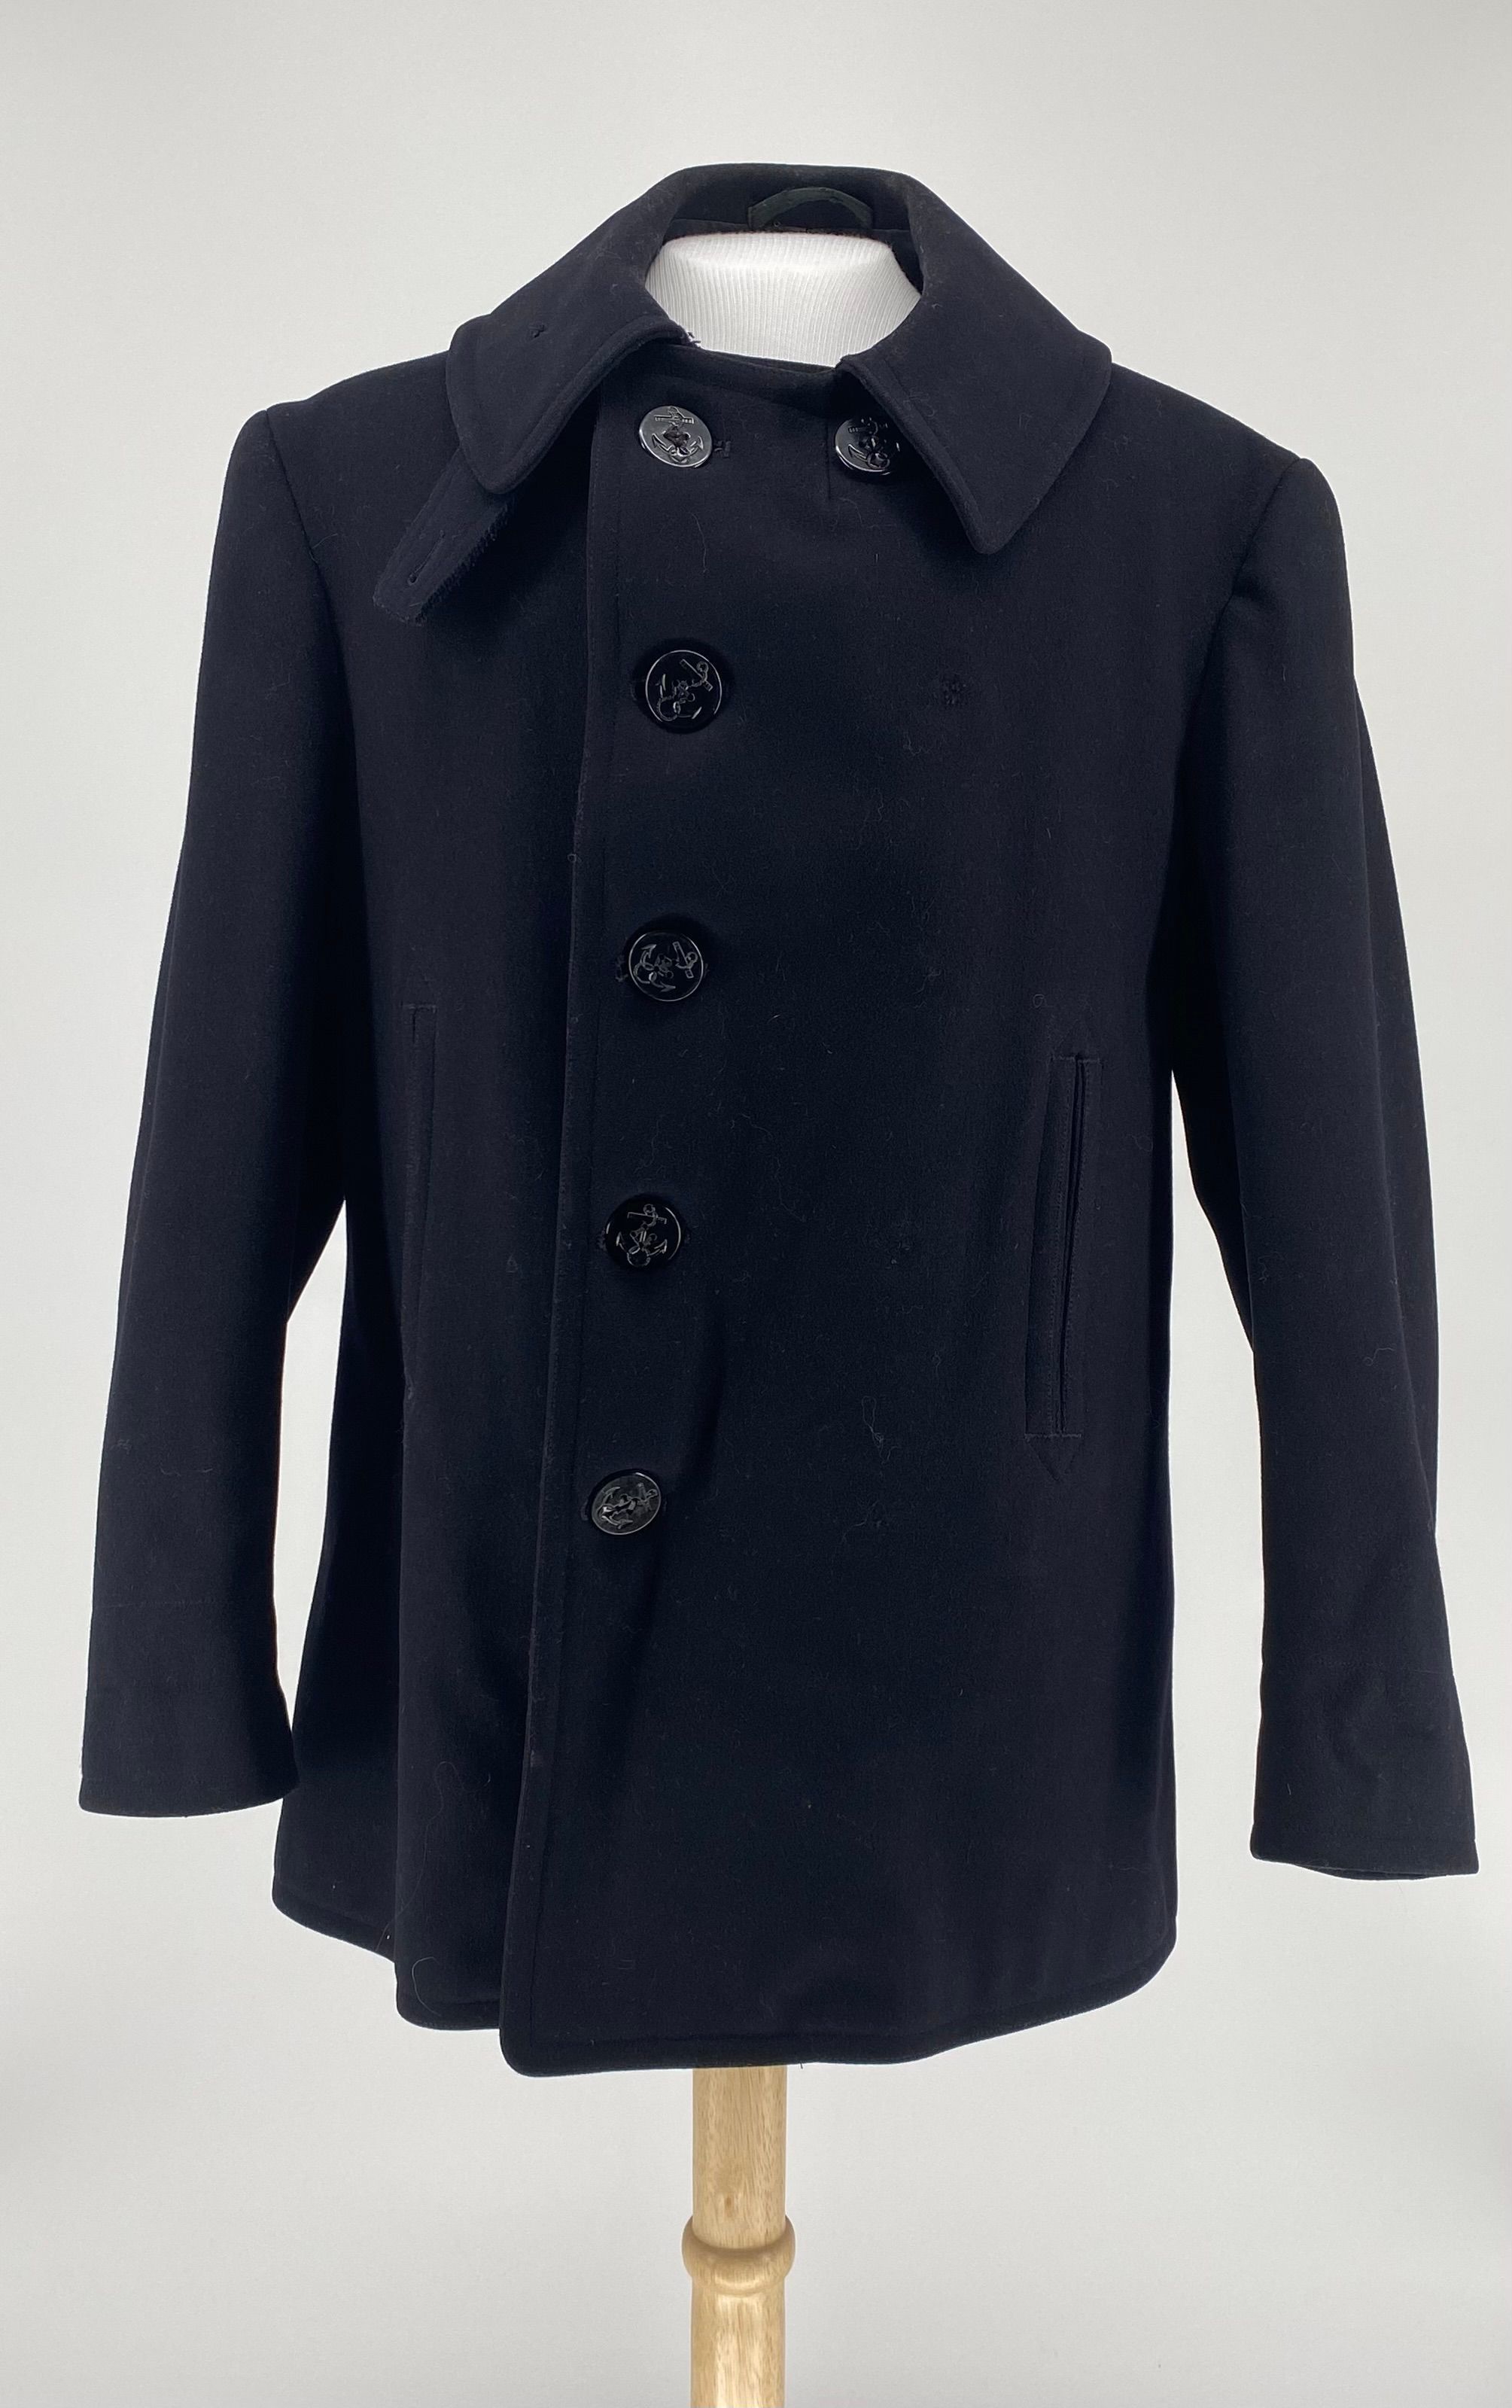 Primary Image of US Navy Peacoat